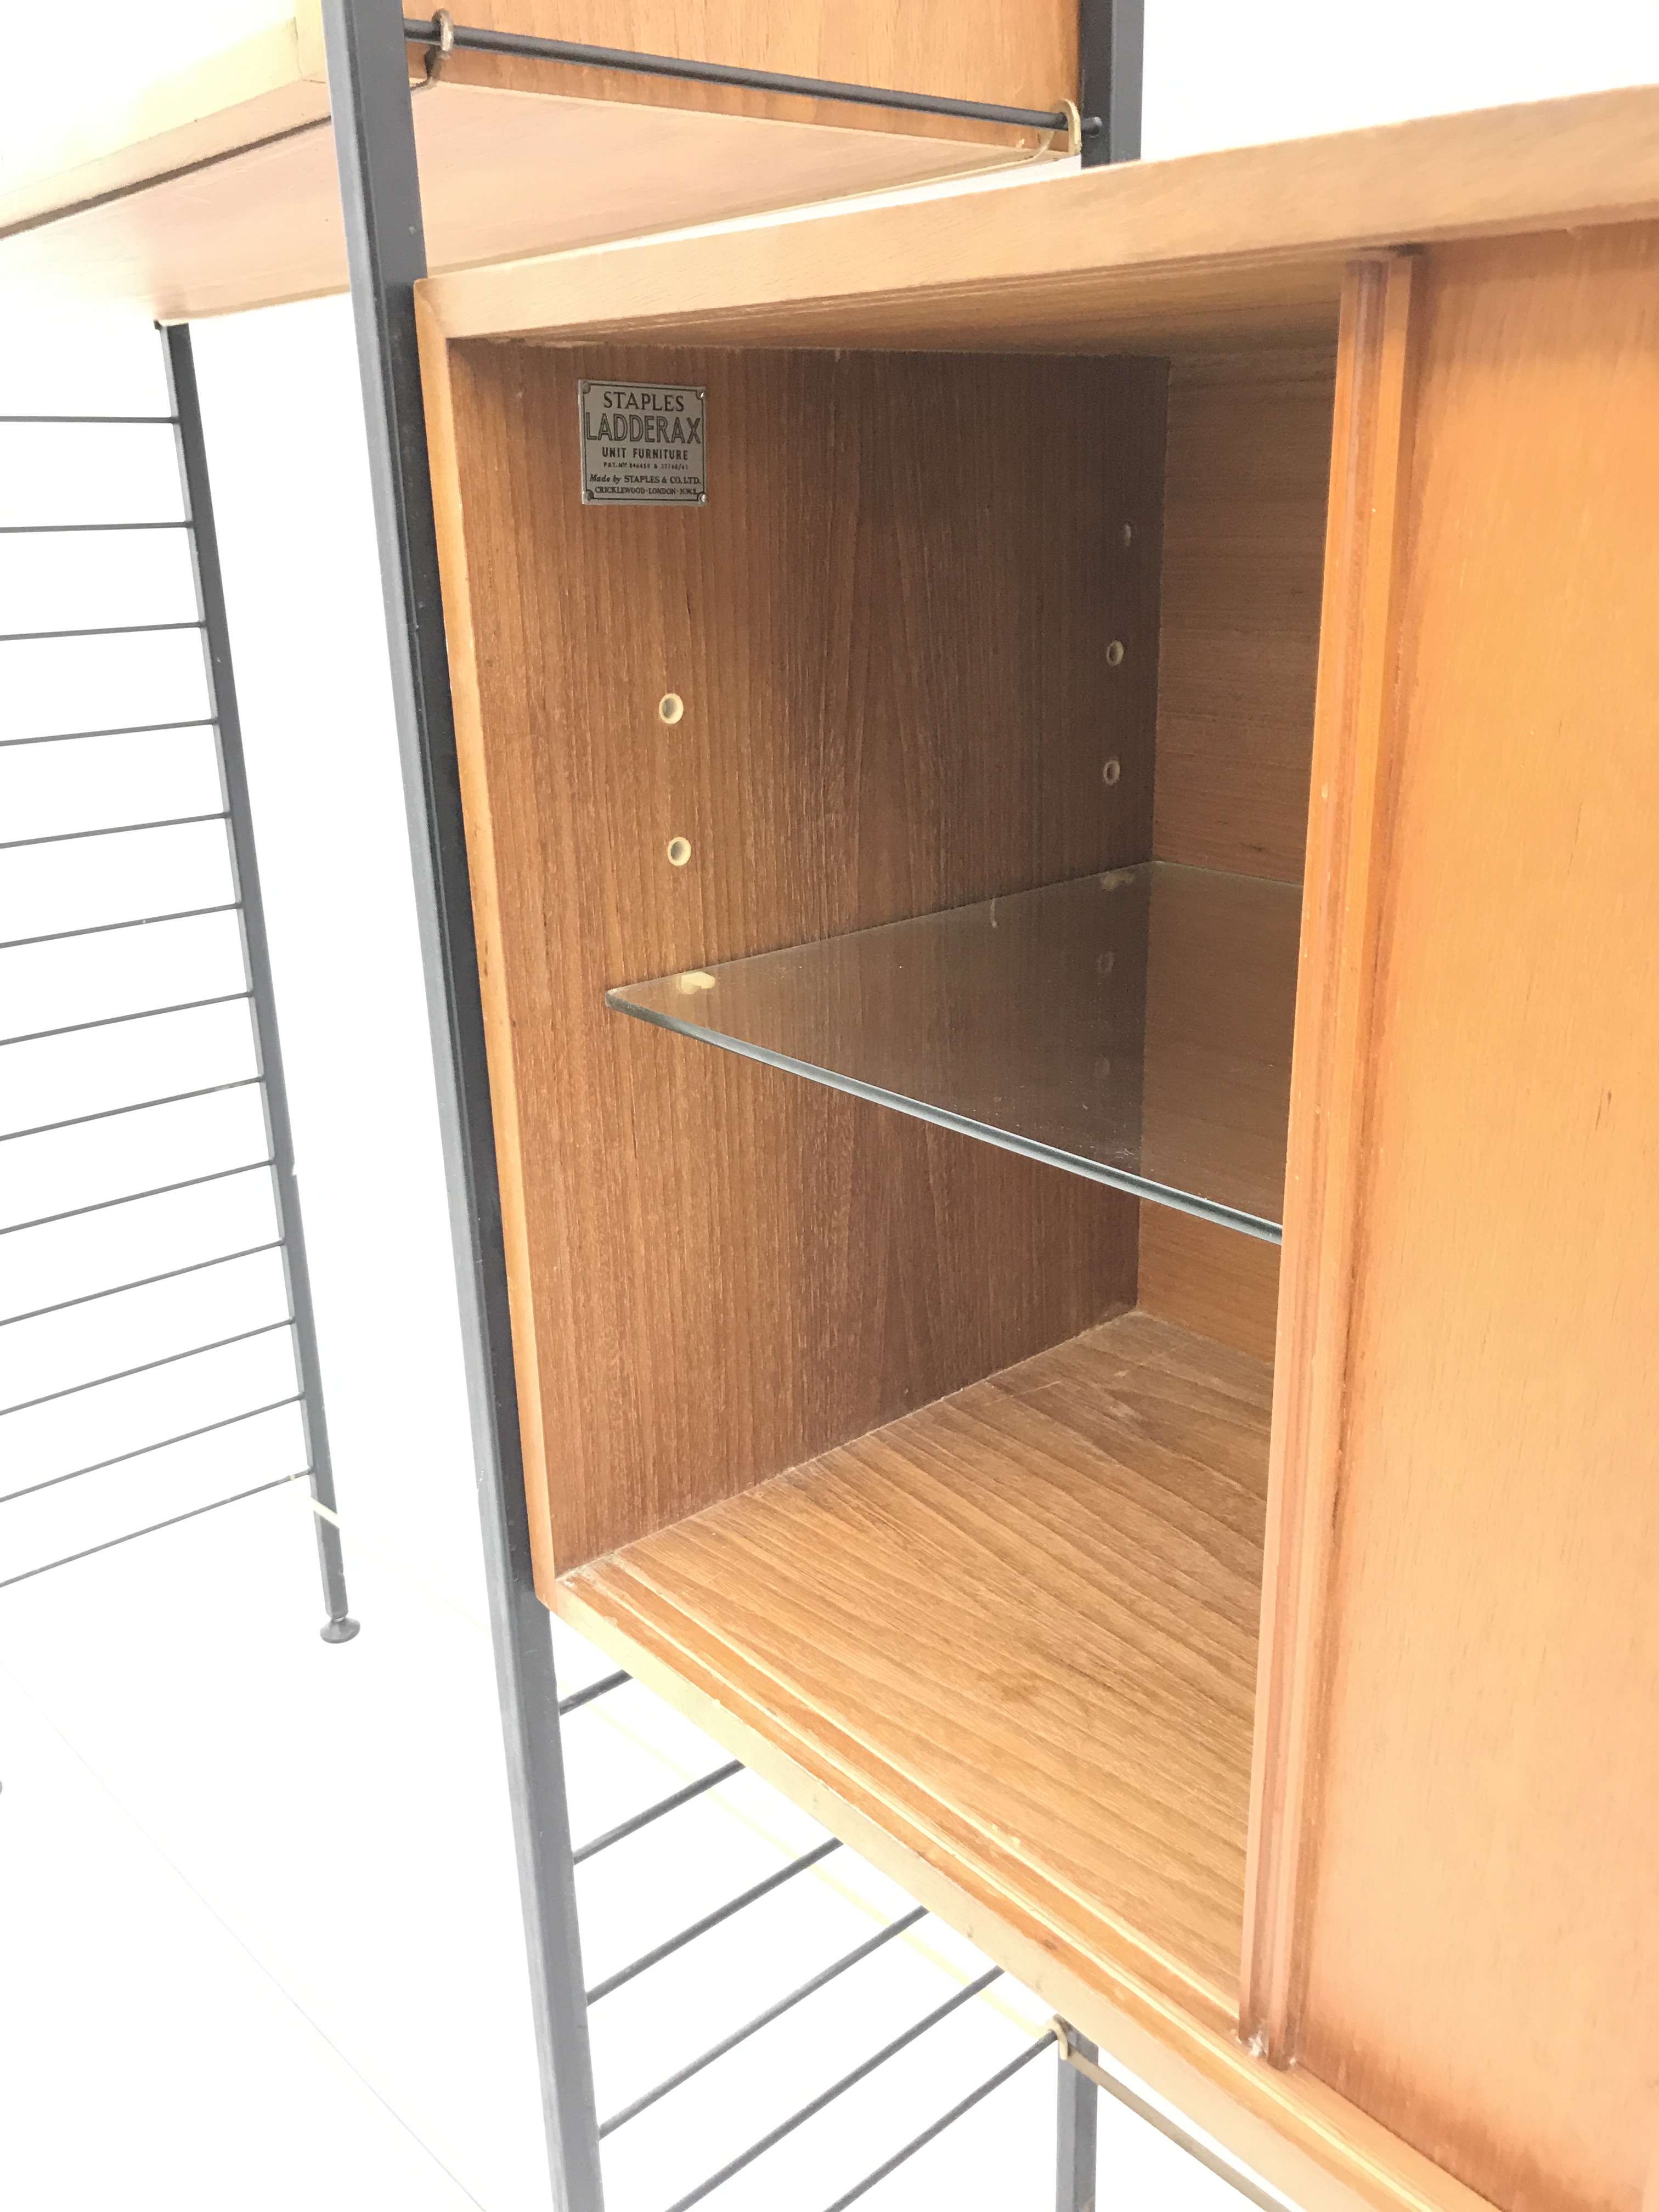 Staples Ladderax three bay sectional wall unit, two teak units comprising of solid and glazed slidin - Image 12 of 16